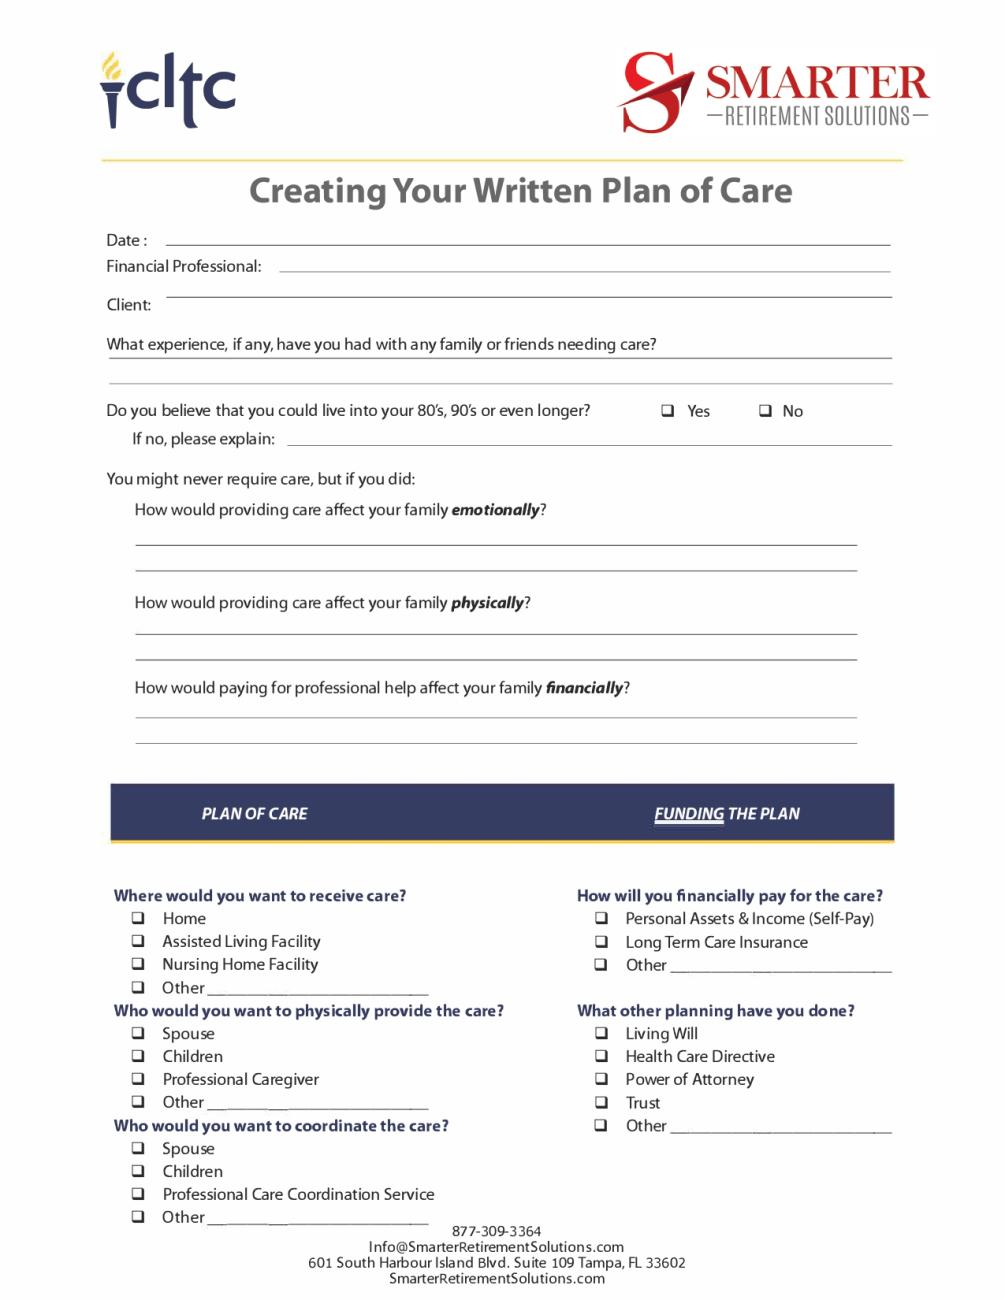 Long-Term Wealth Care Planning | Smarter Retirement Solutions